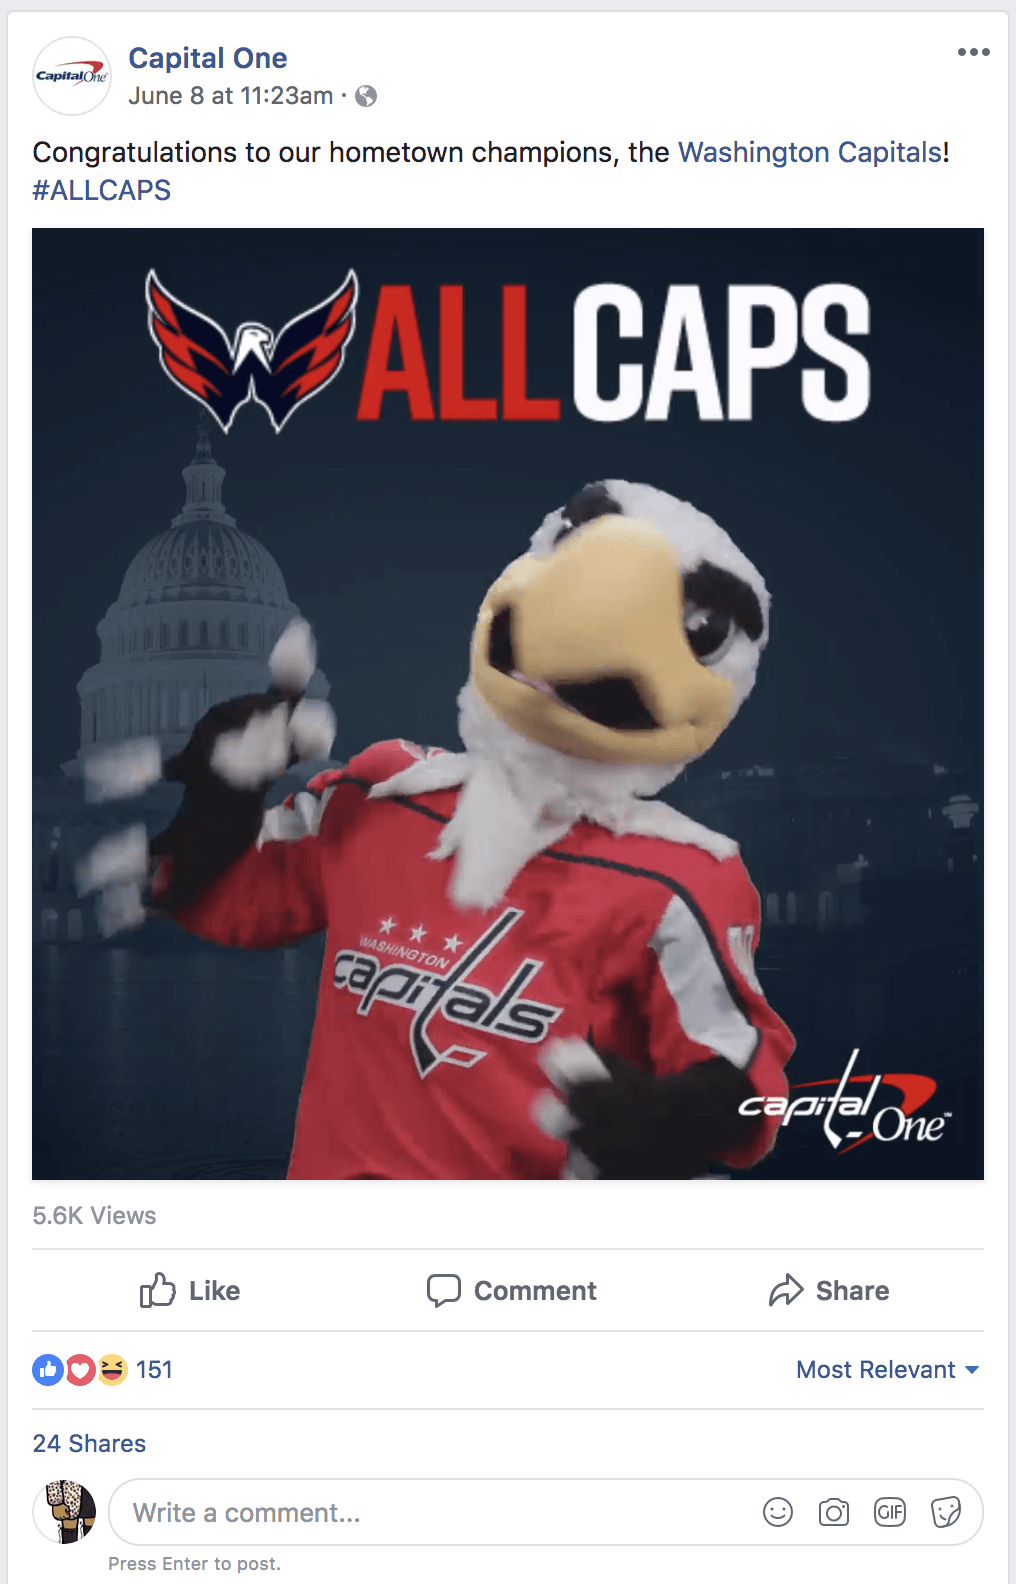 Art Direction, Video Editing & Animation for the Washington Capitals in the Playoffs 🏒